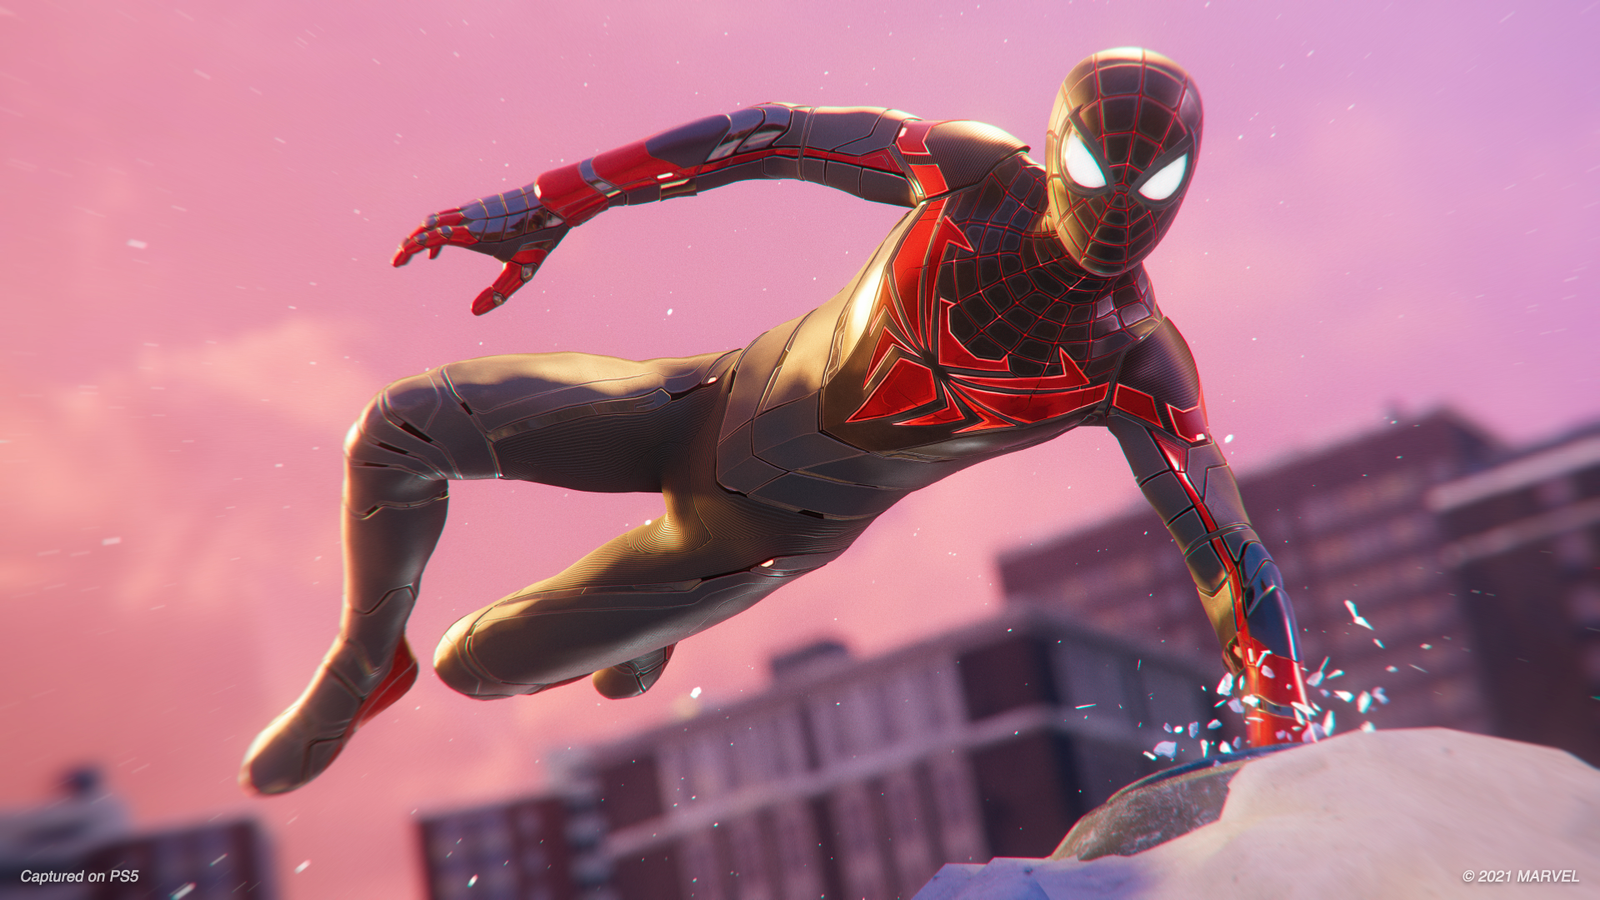 https://assetsio.gnwcdn.com/spider-man-miles-morales-1.jpg?width=1600&height=900&fit=crop&quality=100&format=png&enable=upscale&auto=webp